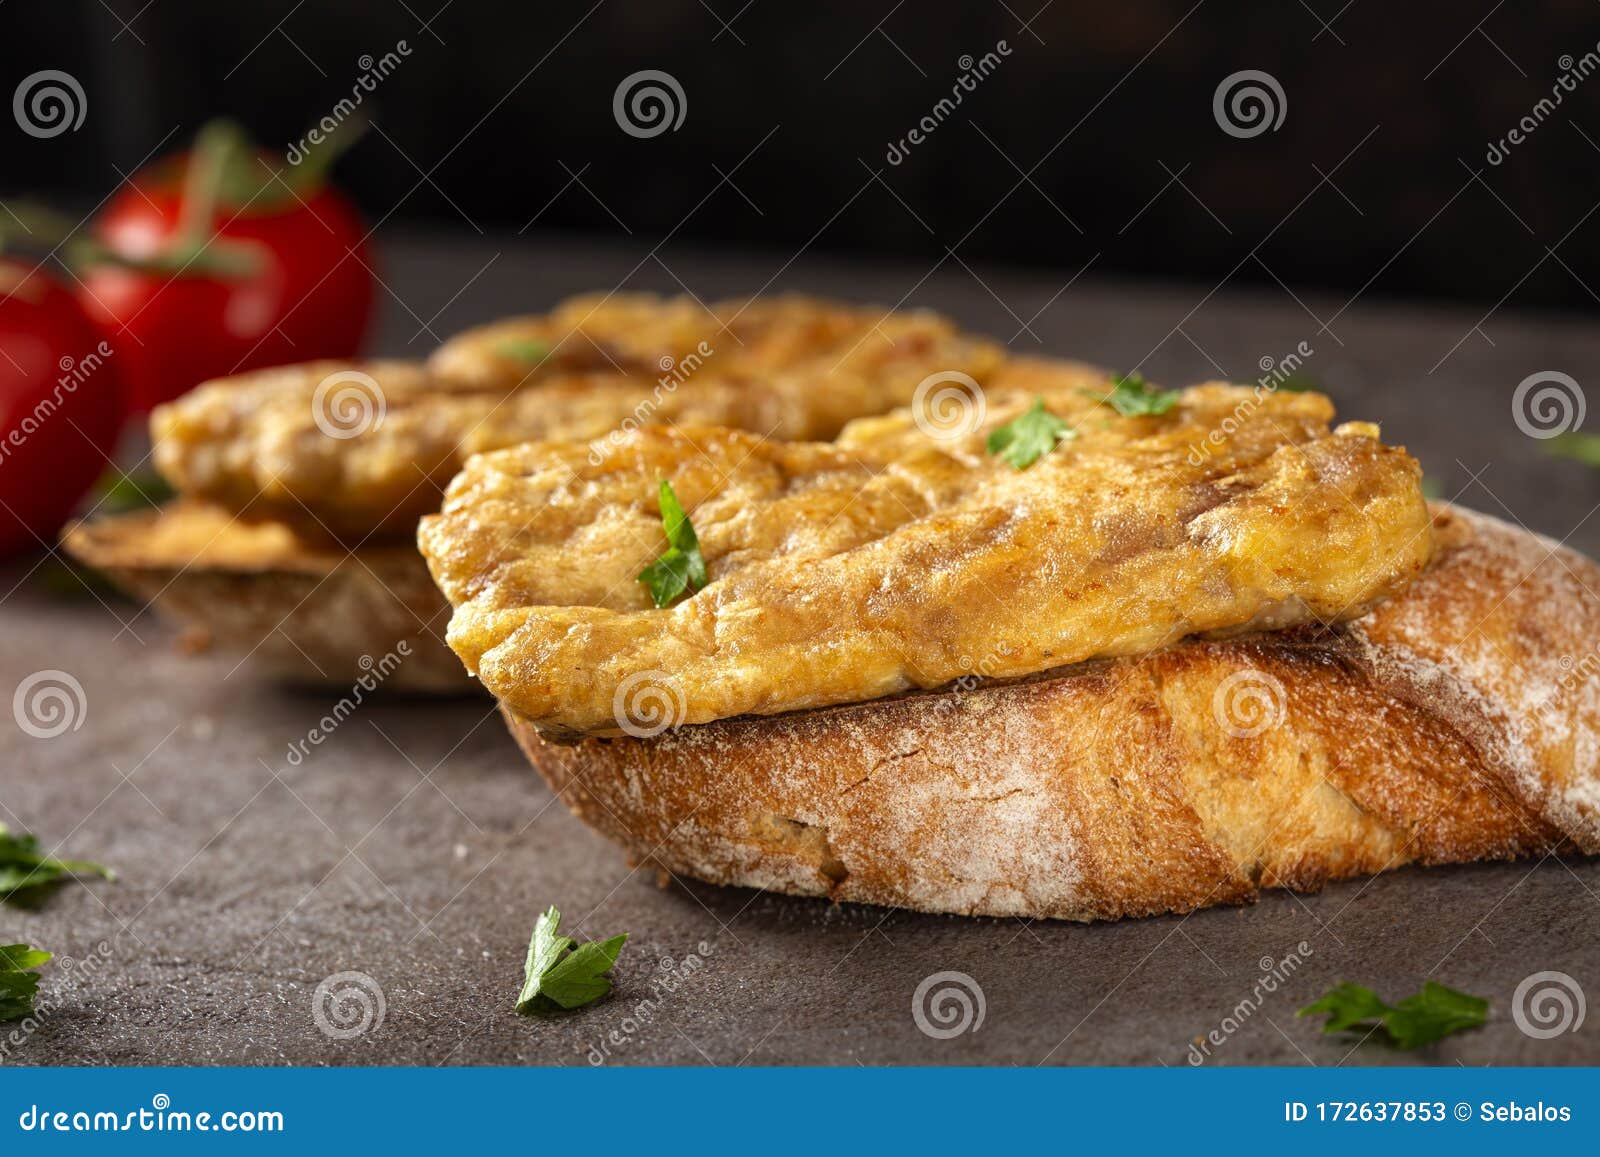 Schnitzel Made from Pork Brain, Flour and Eggs on Toast Stock Image - Image  of meat, parsley: 172637853